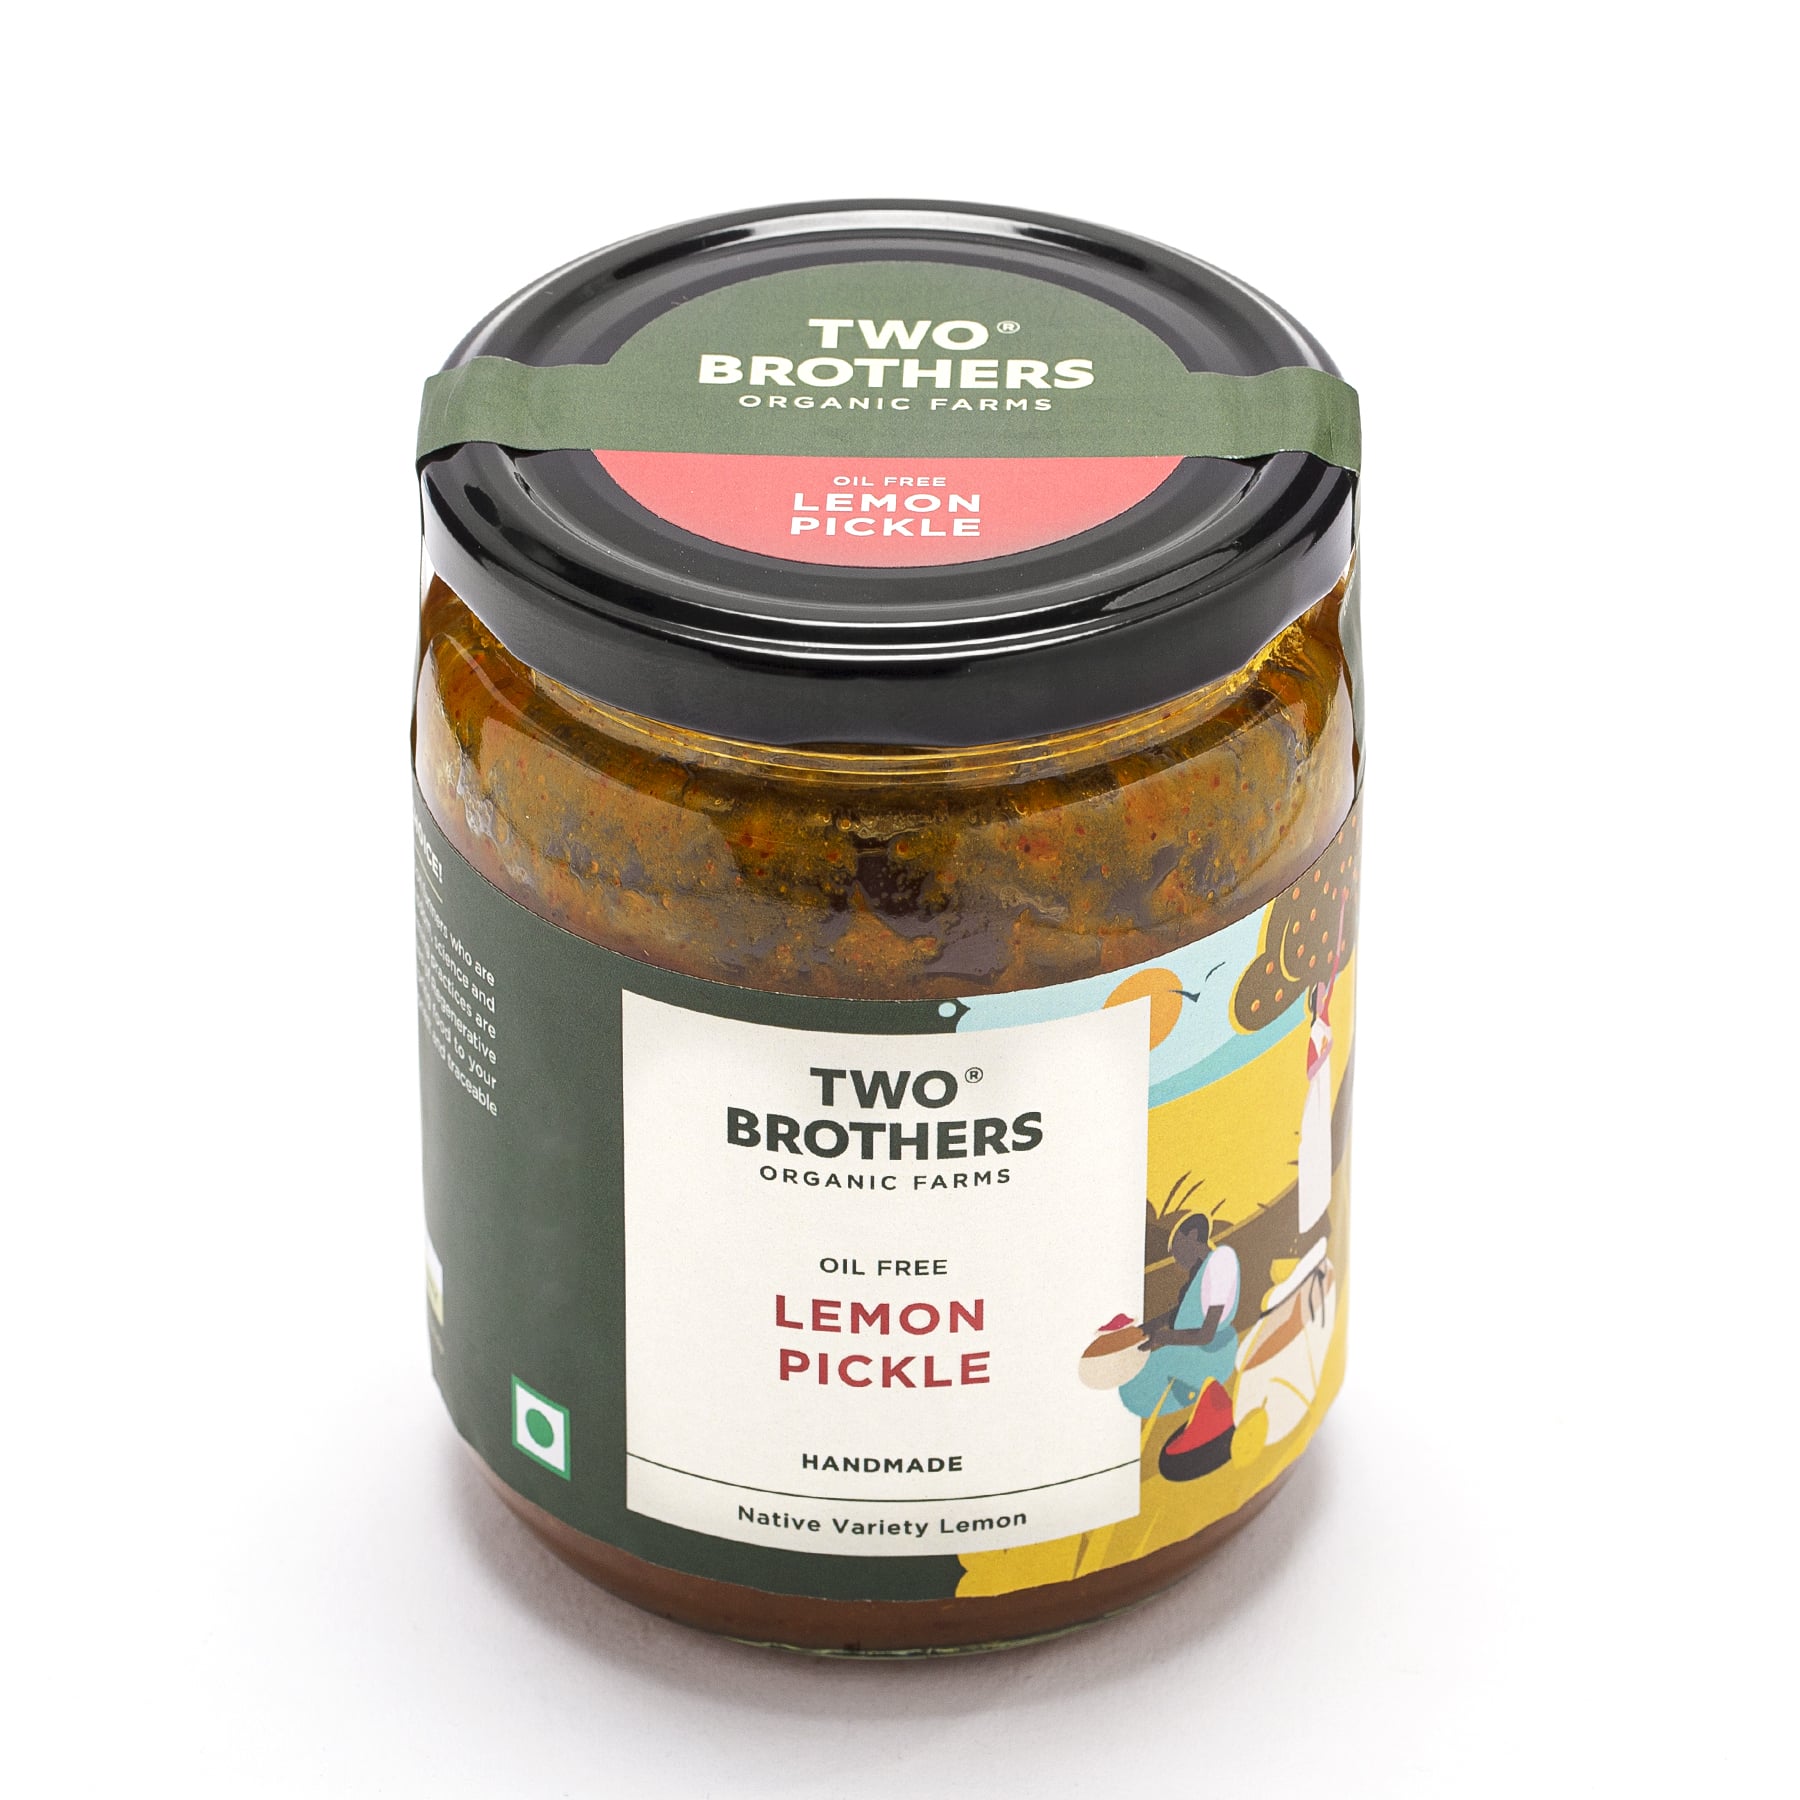 Buy Amorearth Lemon Pickle - Two brothers organic farm online